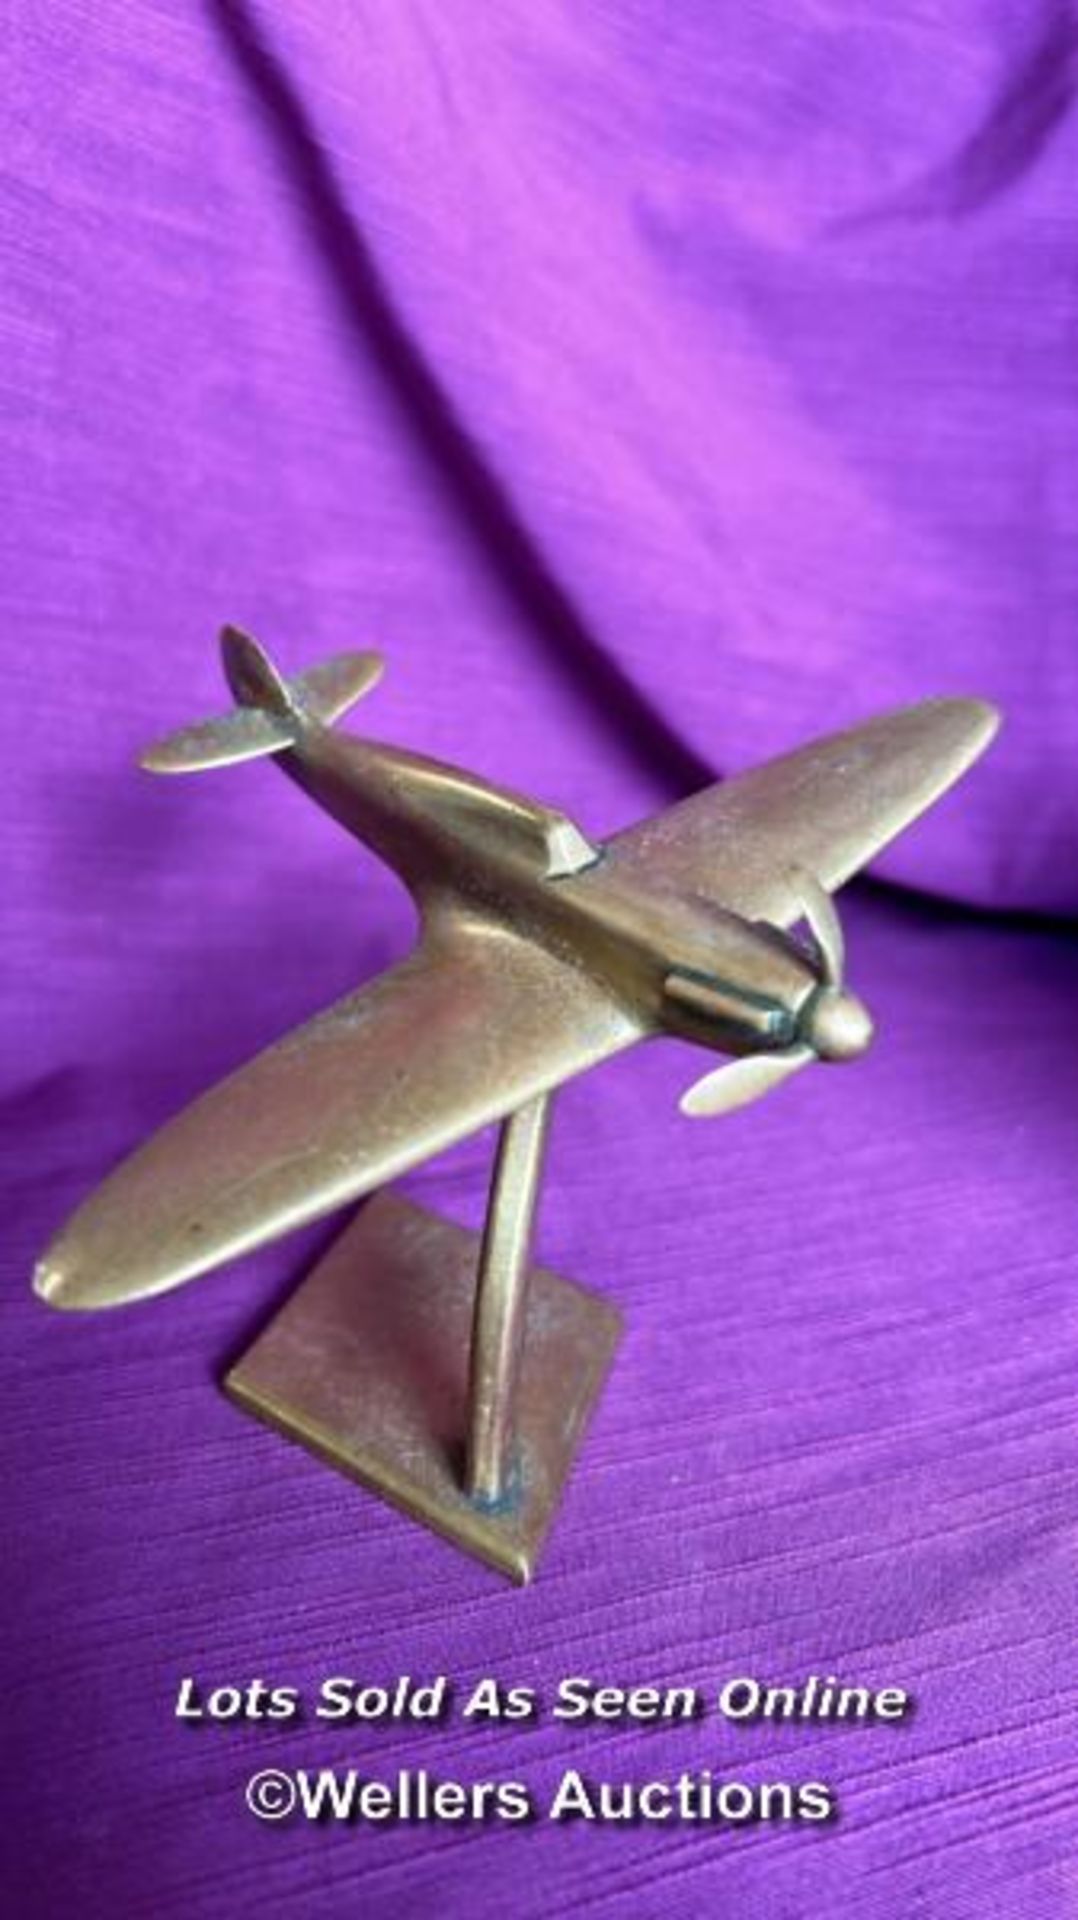 SMALL BRASS MODEL SPITFIRE TOGETHER WITH A SMALL GLOBE DAY CALENDAR - Image 4 of 5